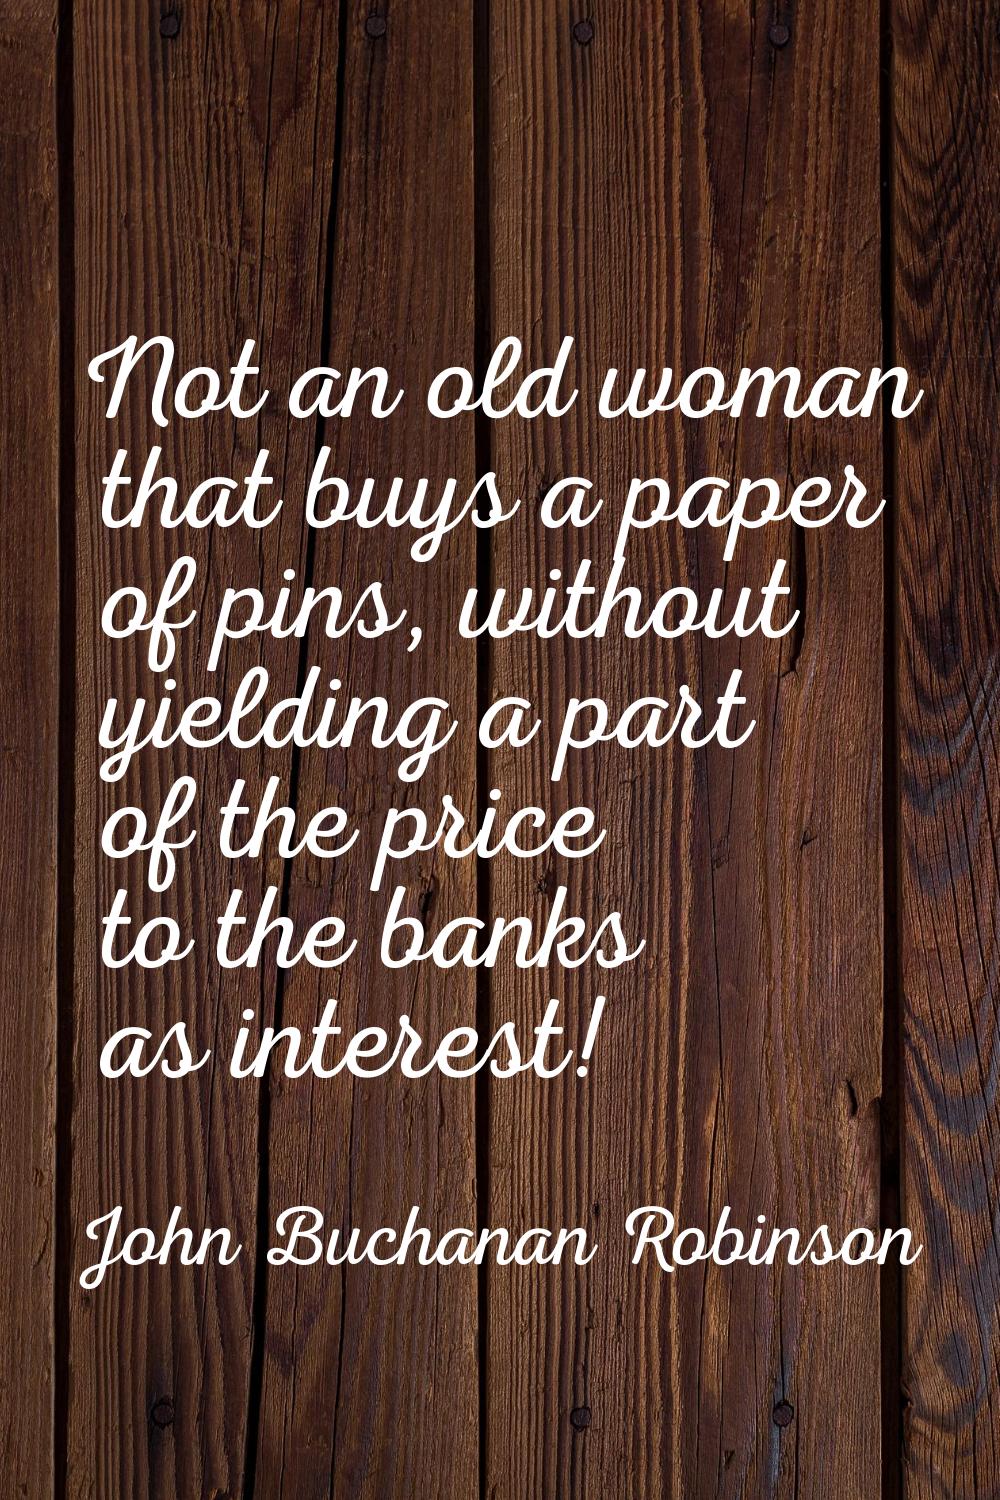 Not an old woman that buys a paper of pins, without yielding a part of the price to the banks as in